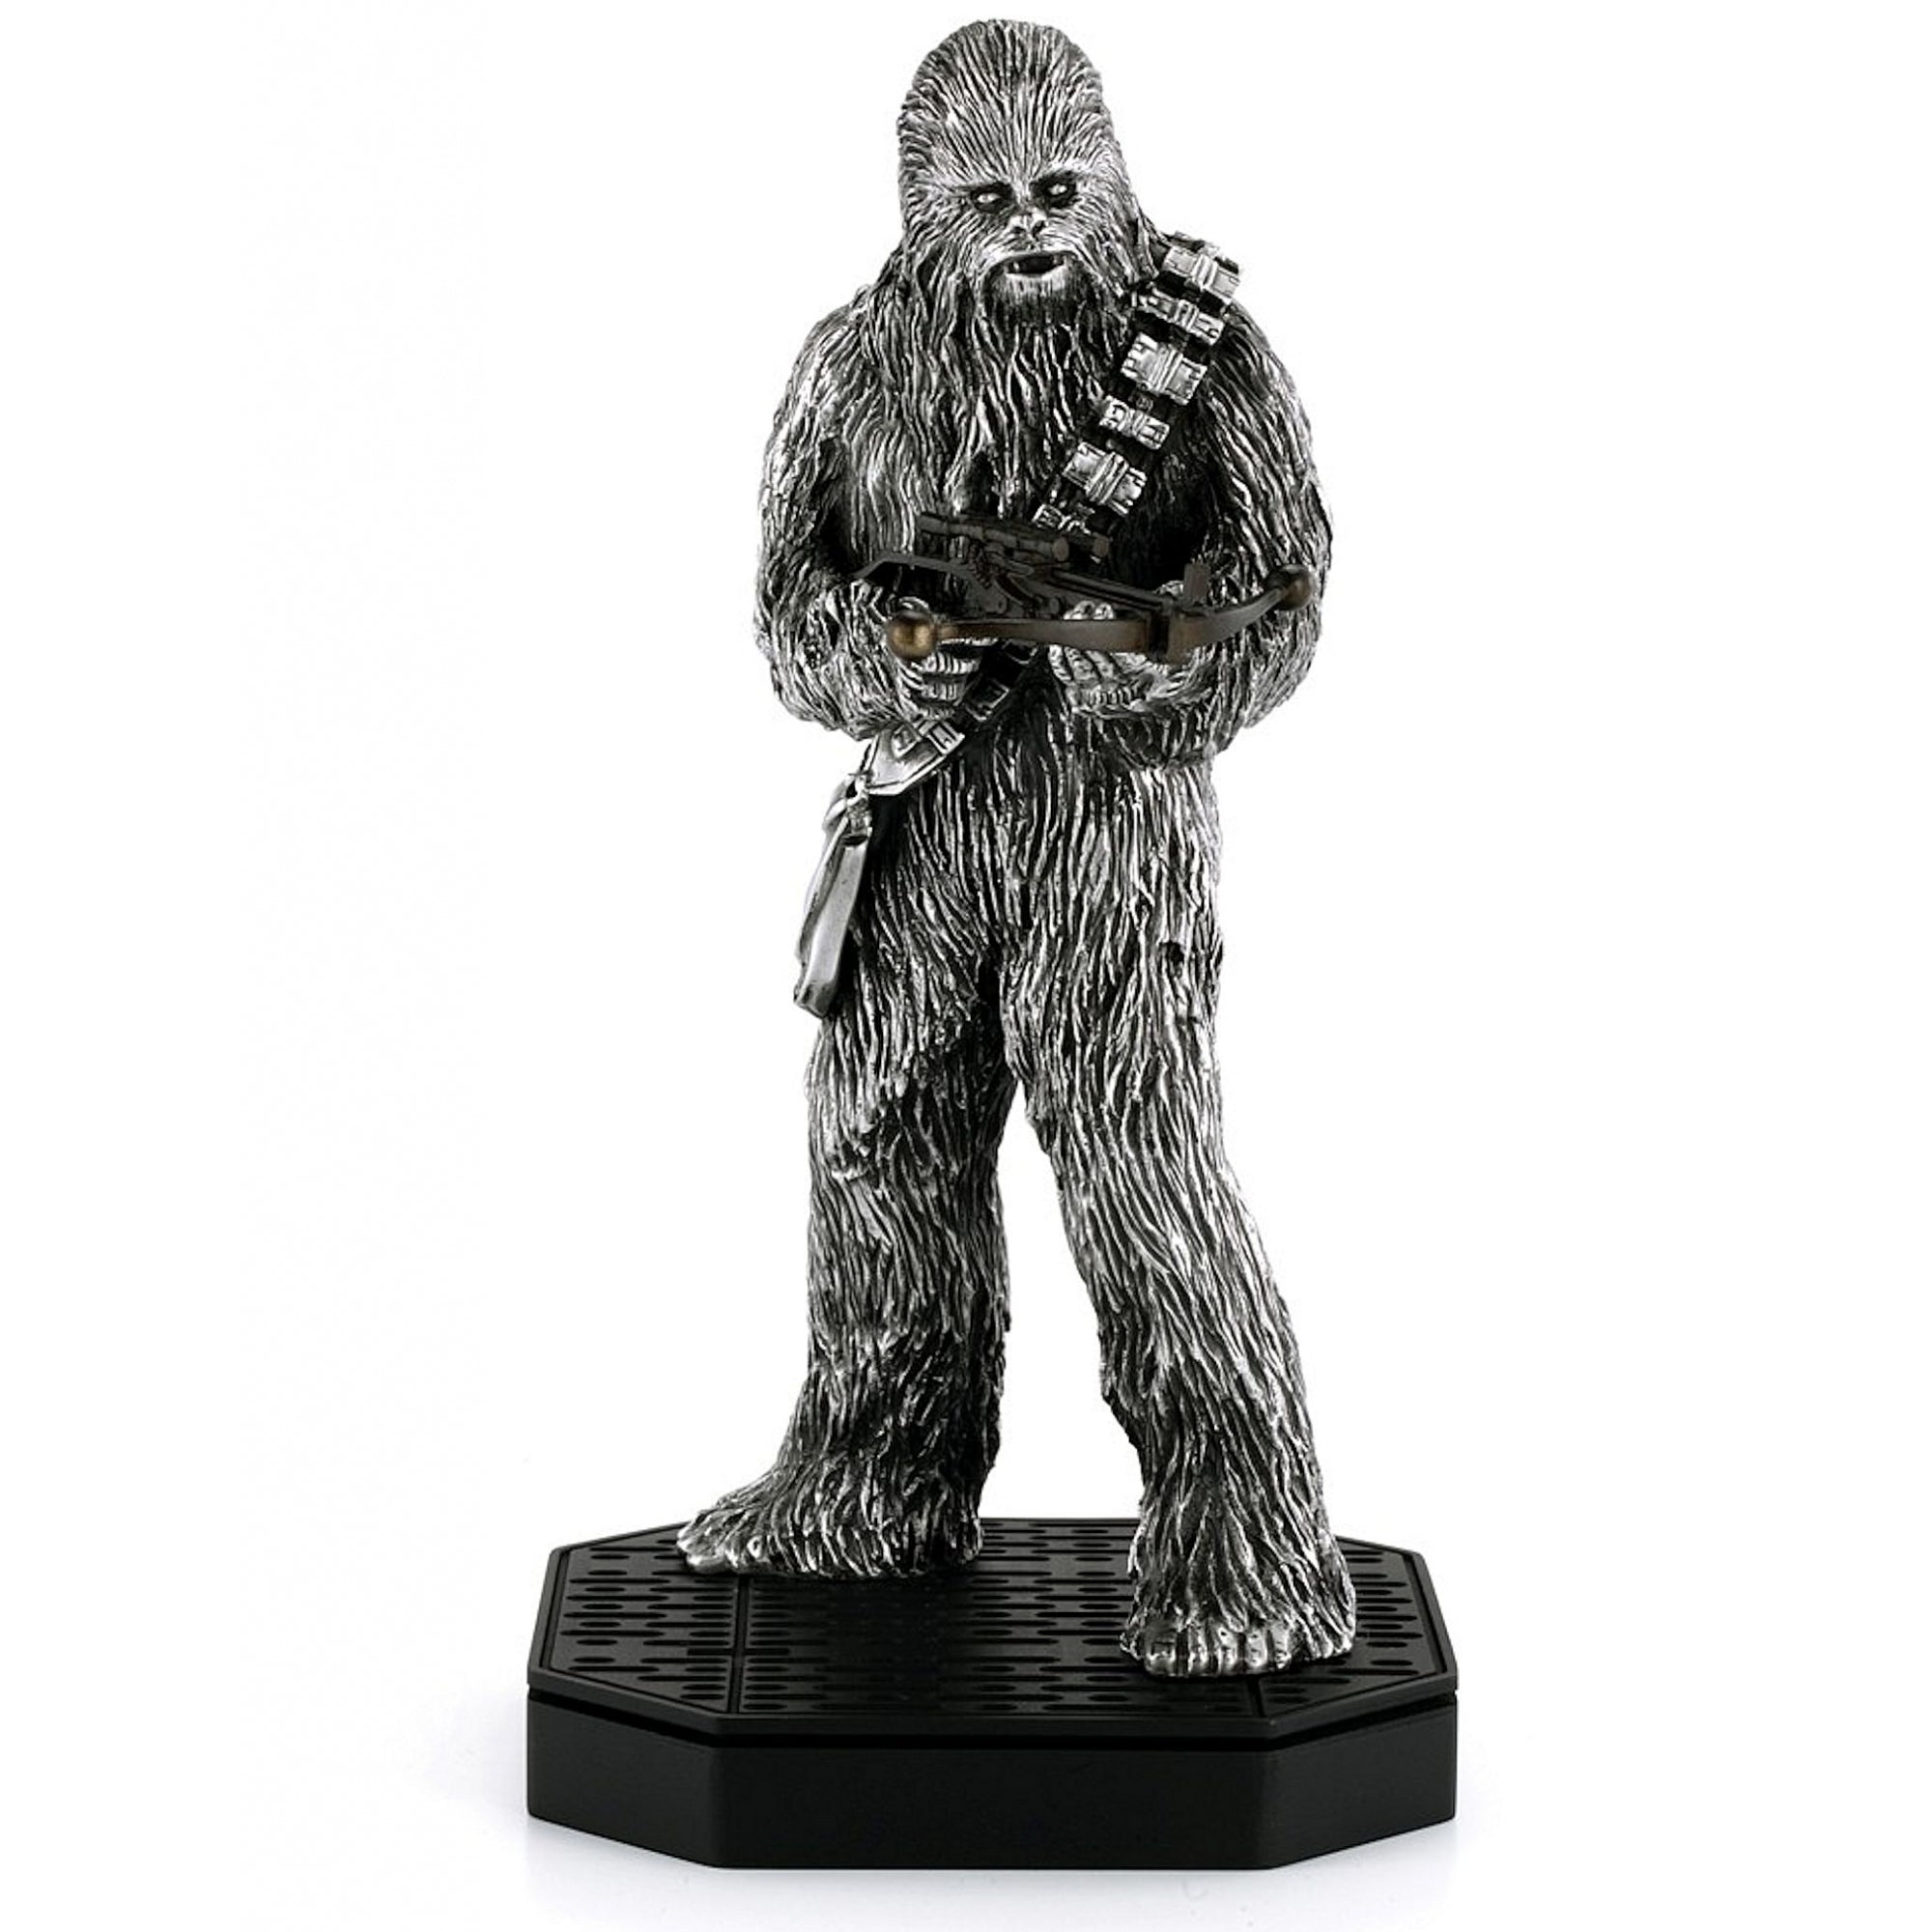 Star Wars By Royal Selangor 017926 Limited Edition Chewbacca Figurine product